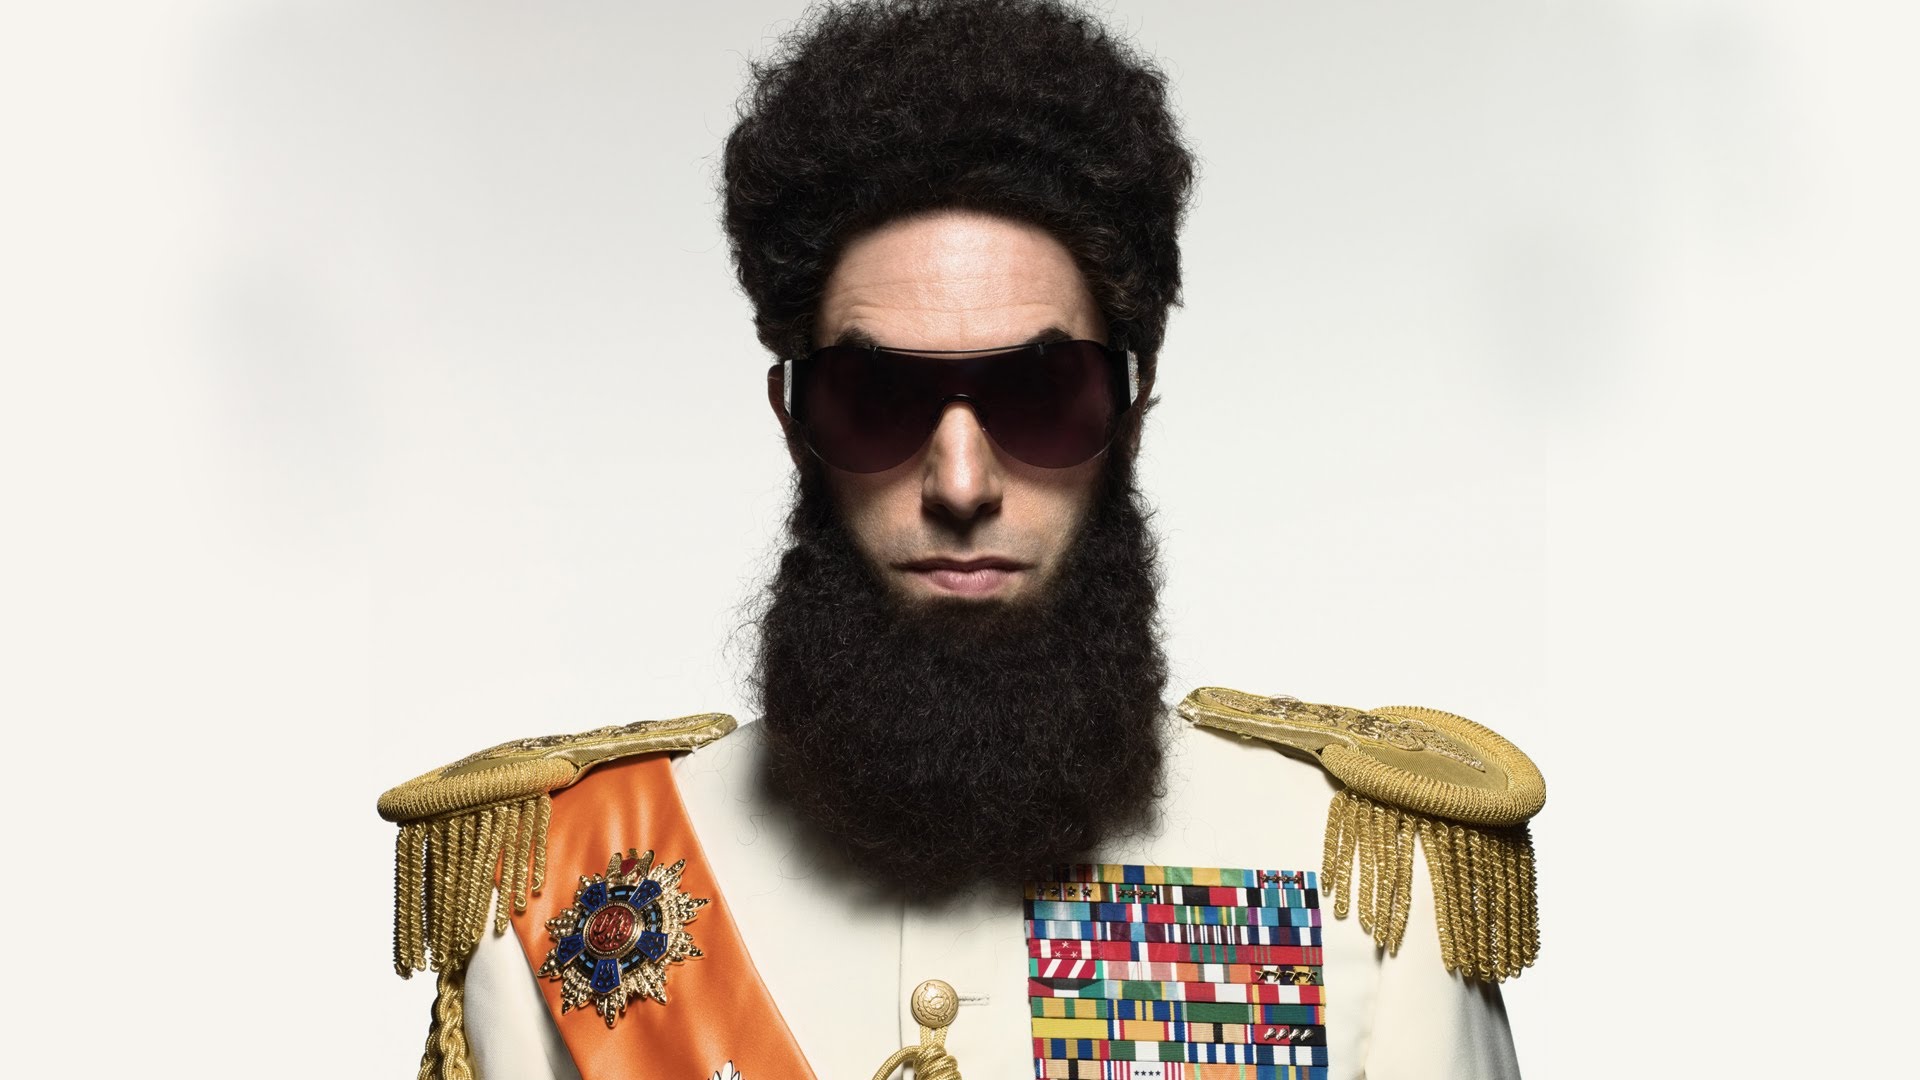 Amazing The Dictator Pictures & Backgrounds